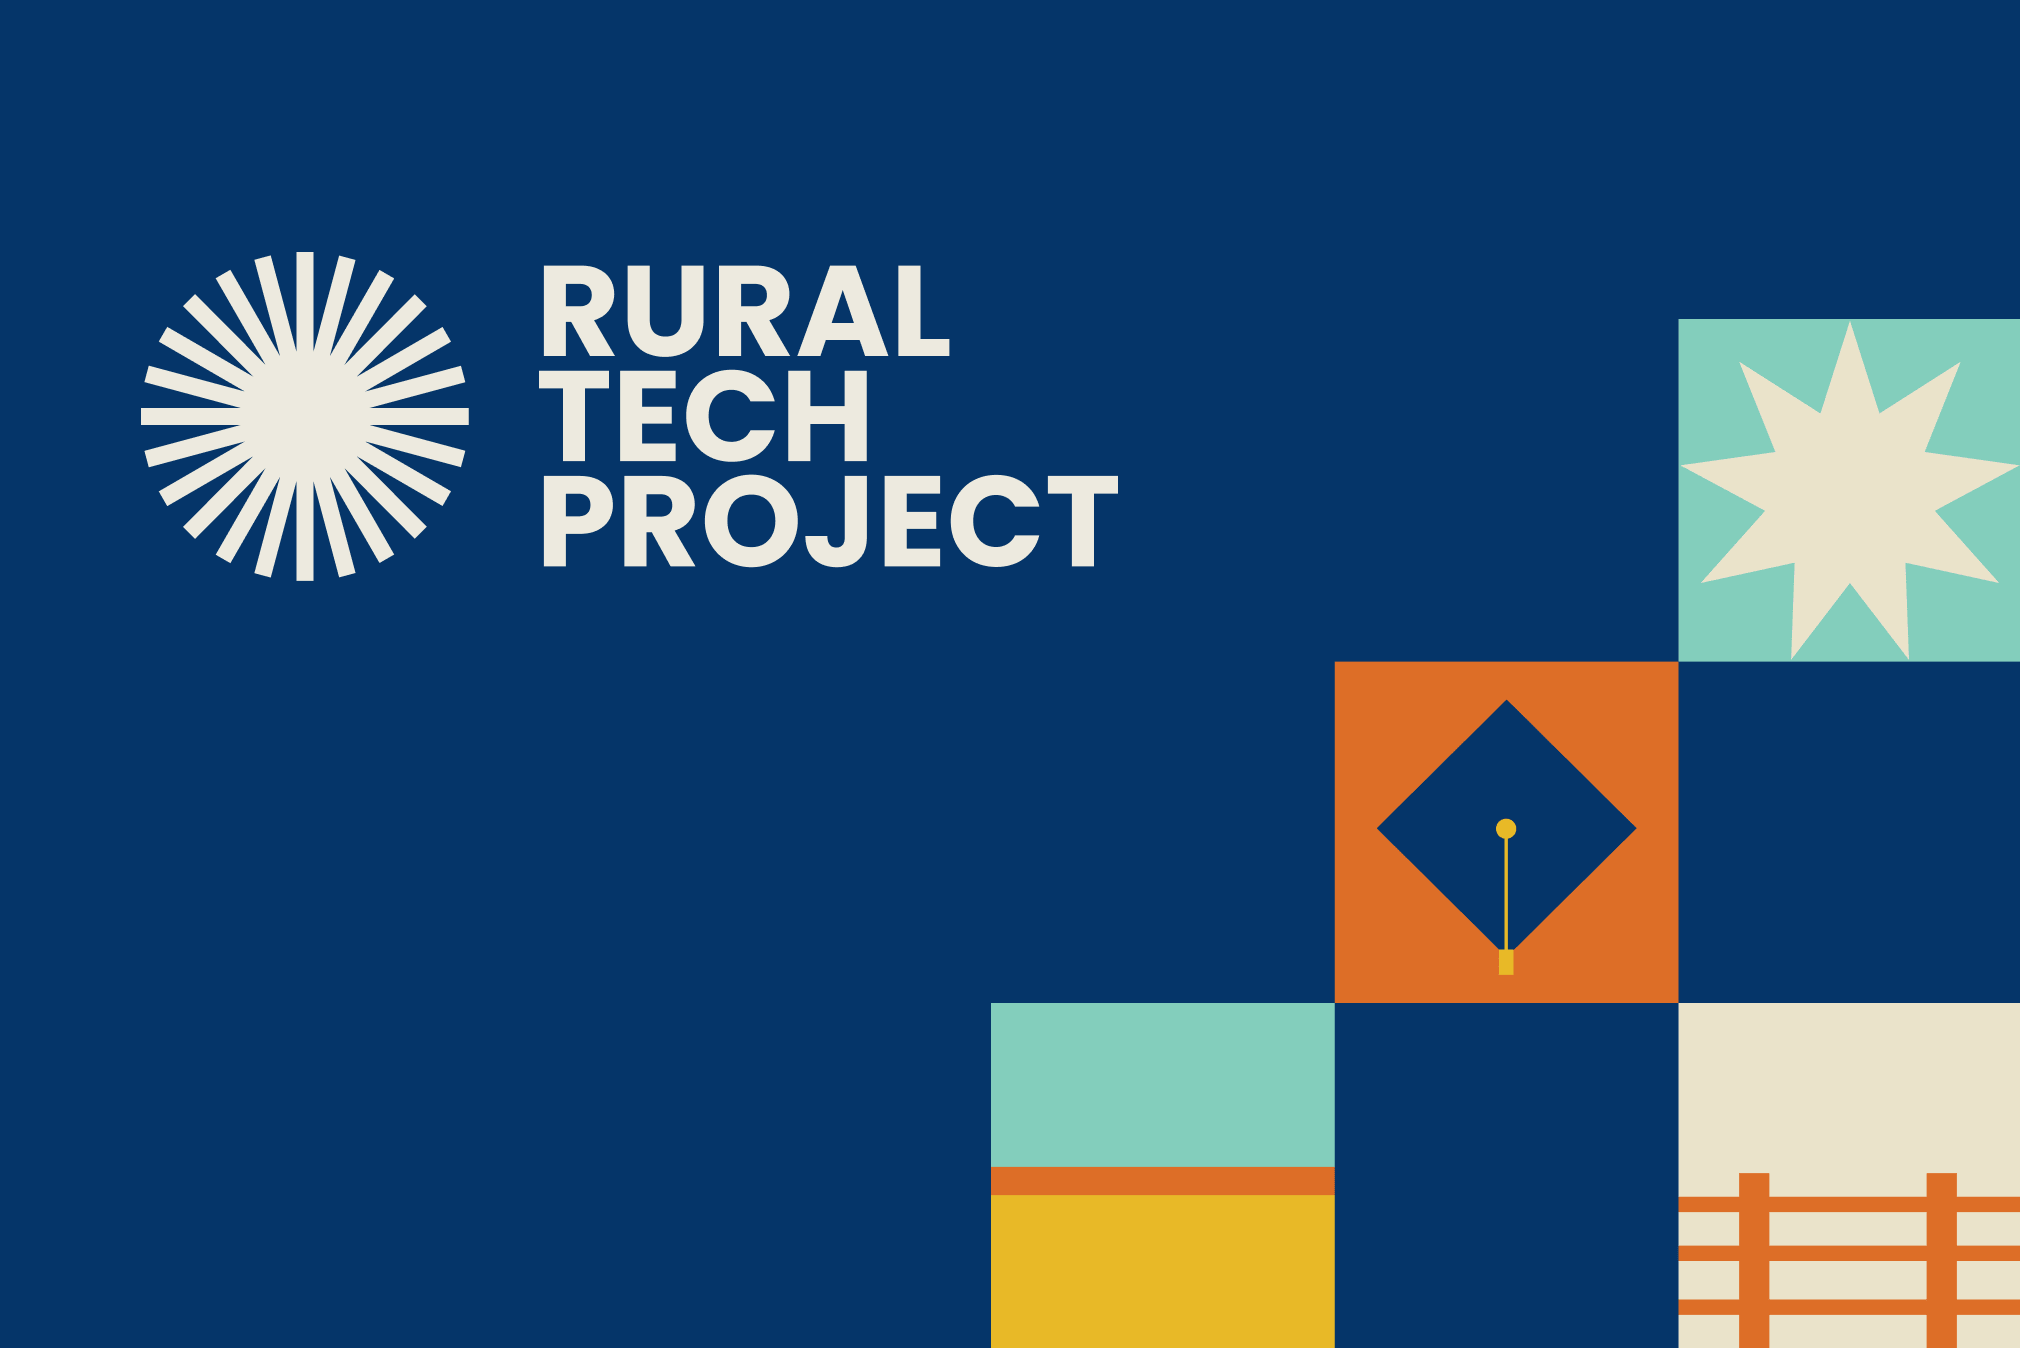 Just launched: $600,000 challenge to advance rural technology education